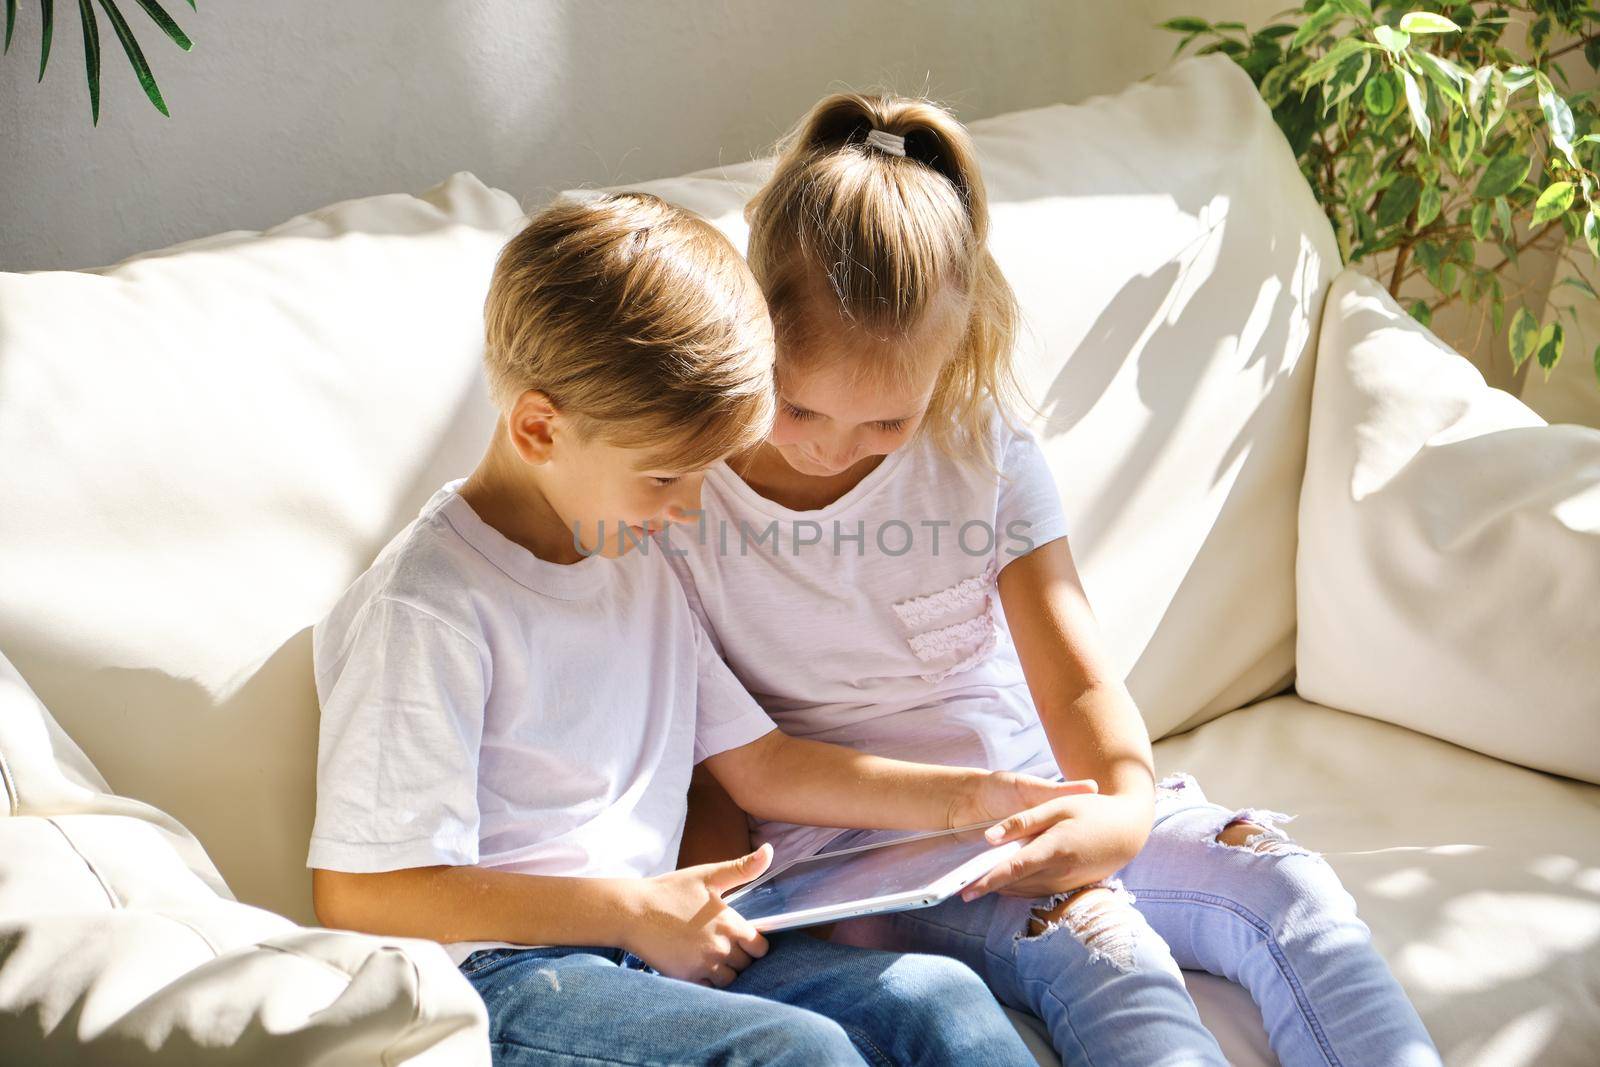 family, children, technology and home concept - smiling brother and sister with tablet pc computer on the sofa in living room